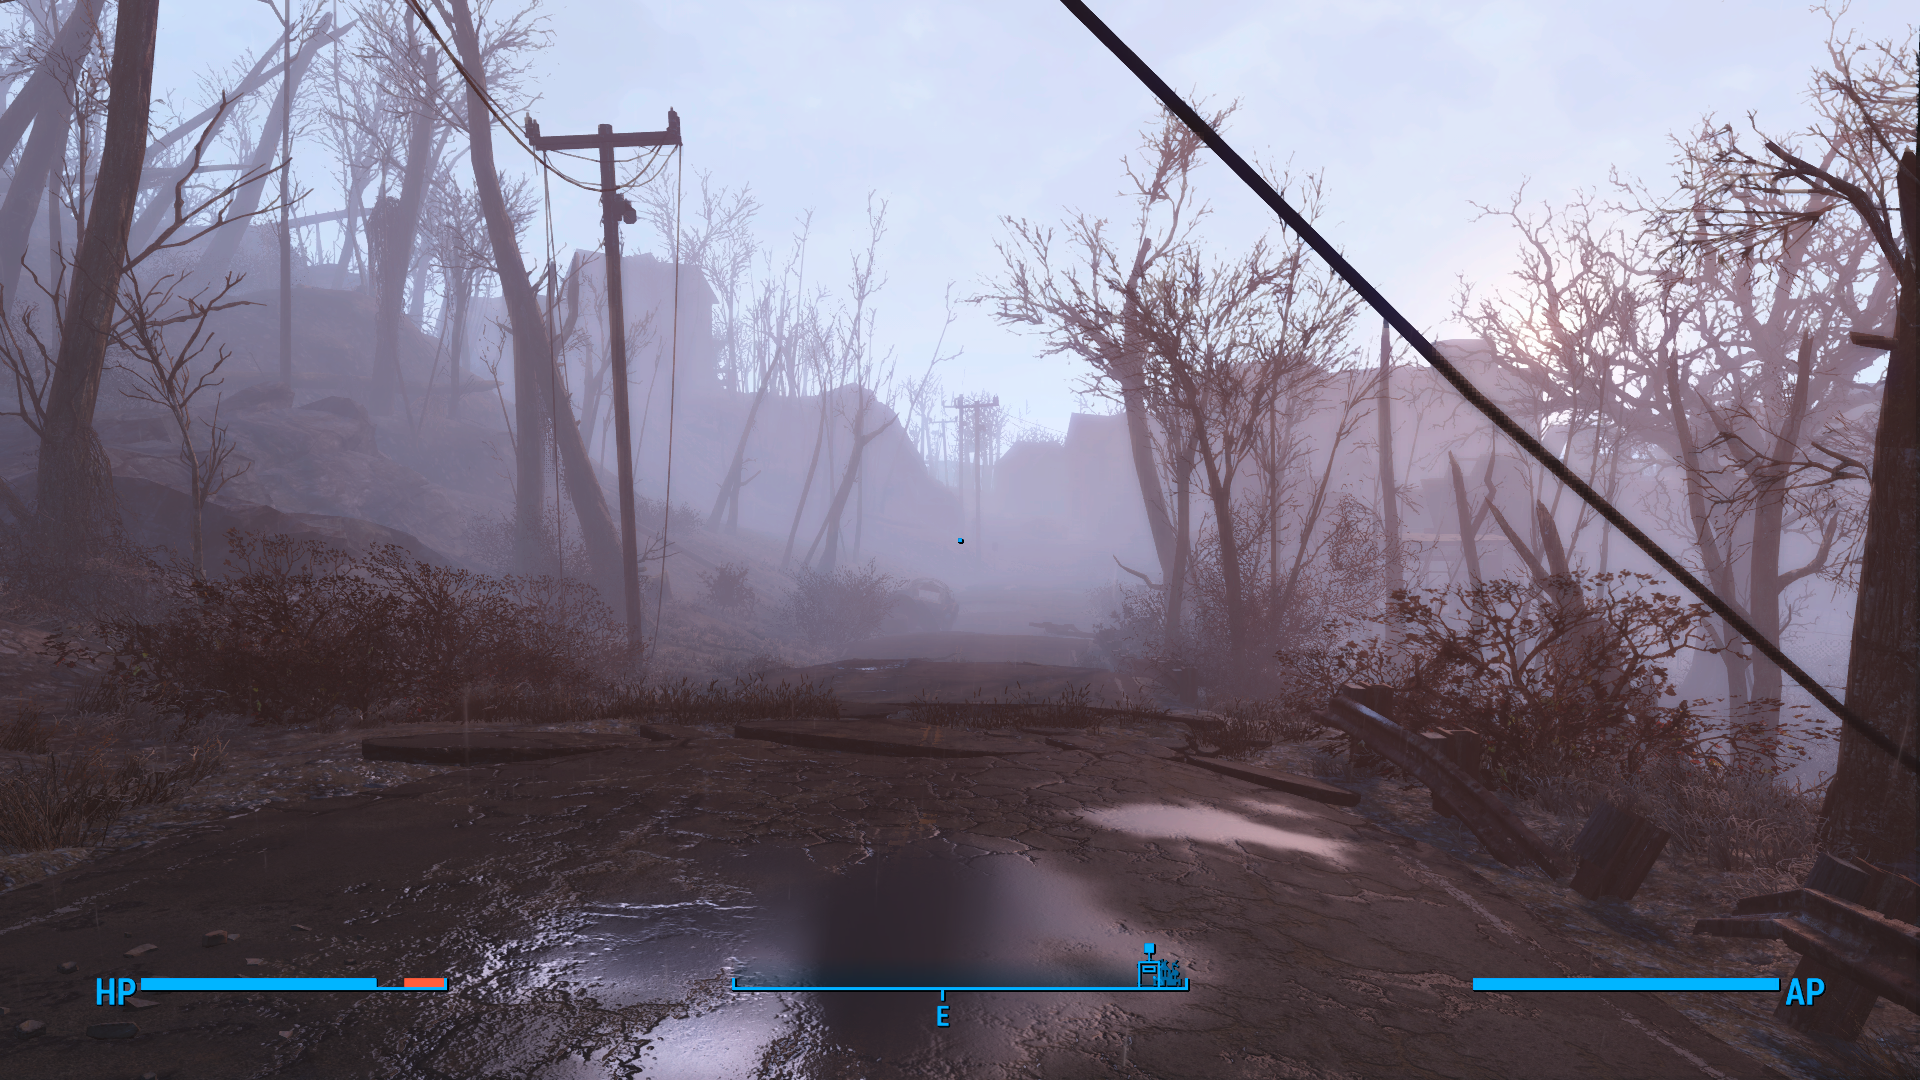 Media asset in full size related to 3dfxzone.it news item entitled as follows: Guarda gli screenshots leaked di Fallout 4 su PlayStation 4 in Full HD | Image Name: news23301_Fallout-4-PS4-Screenshot_3.png